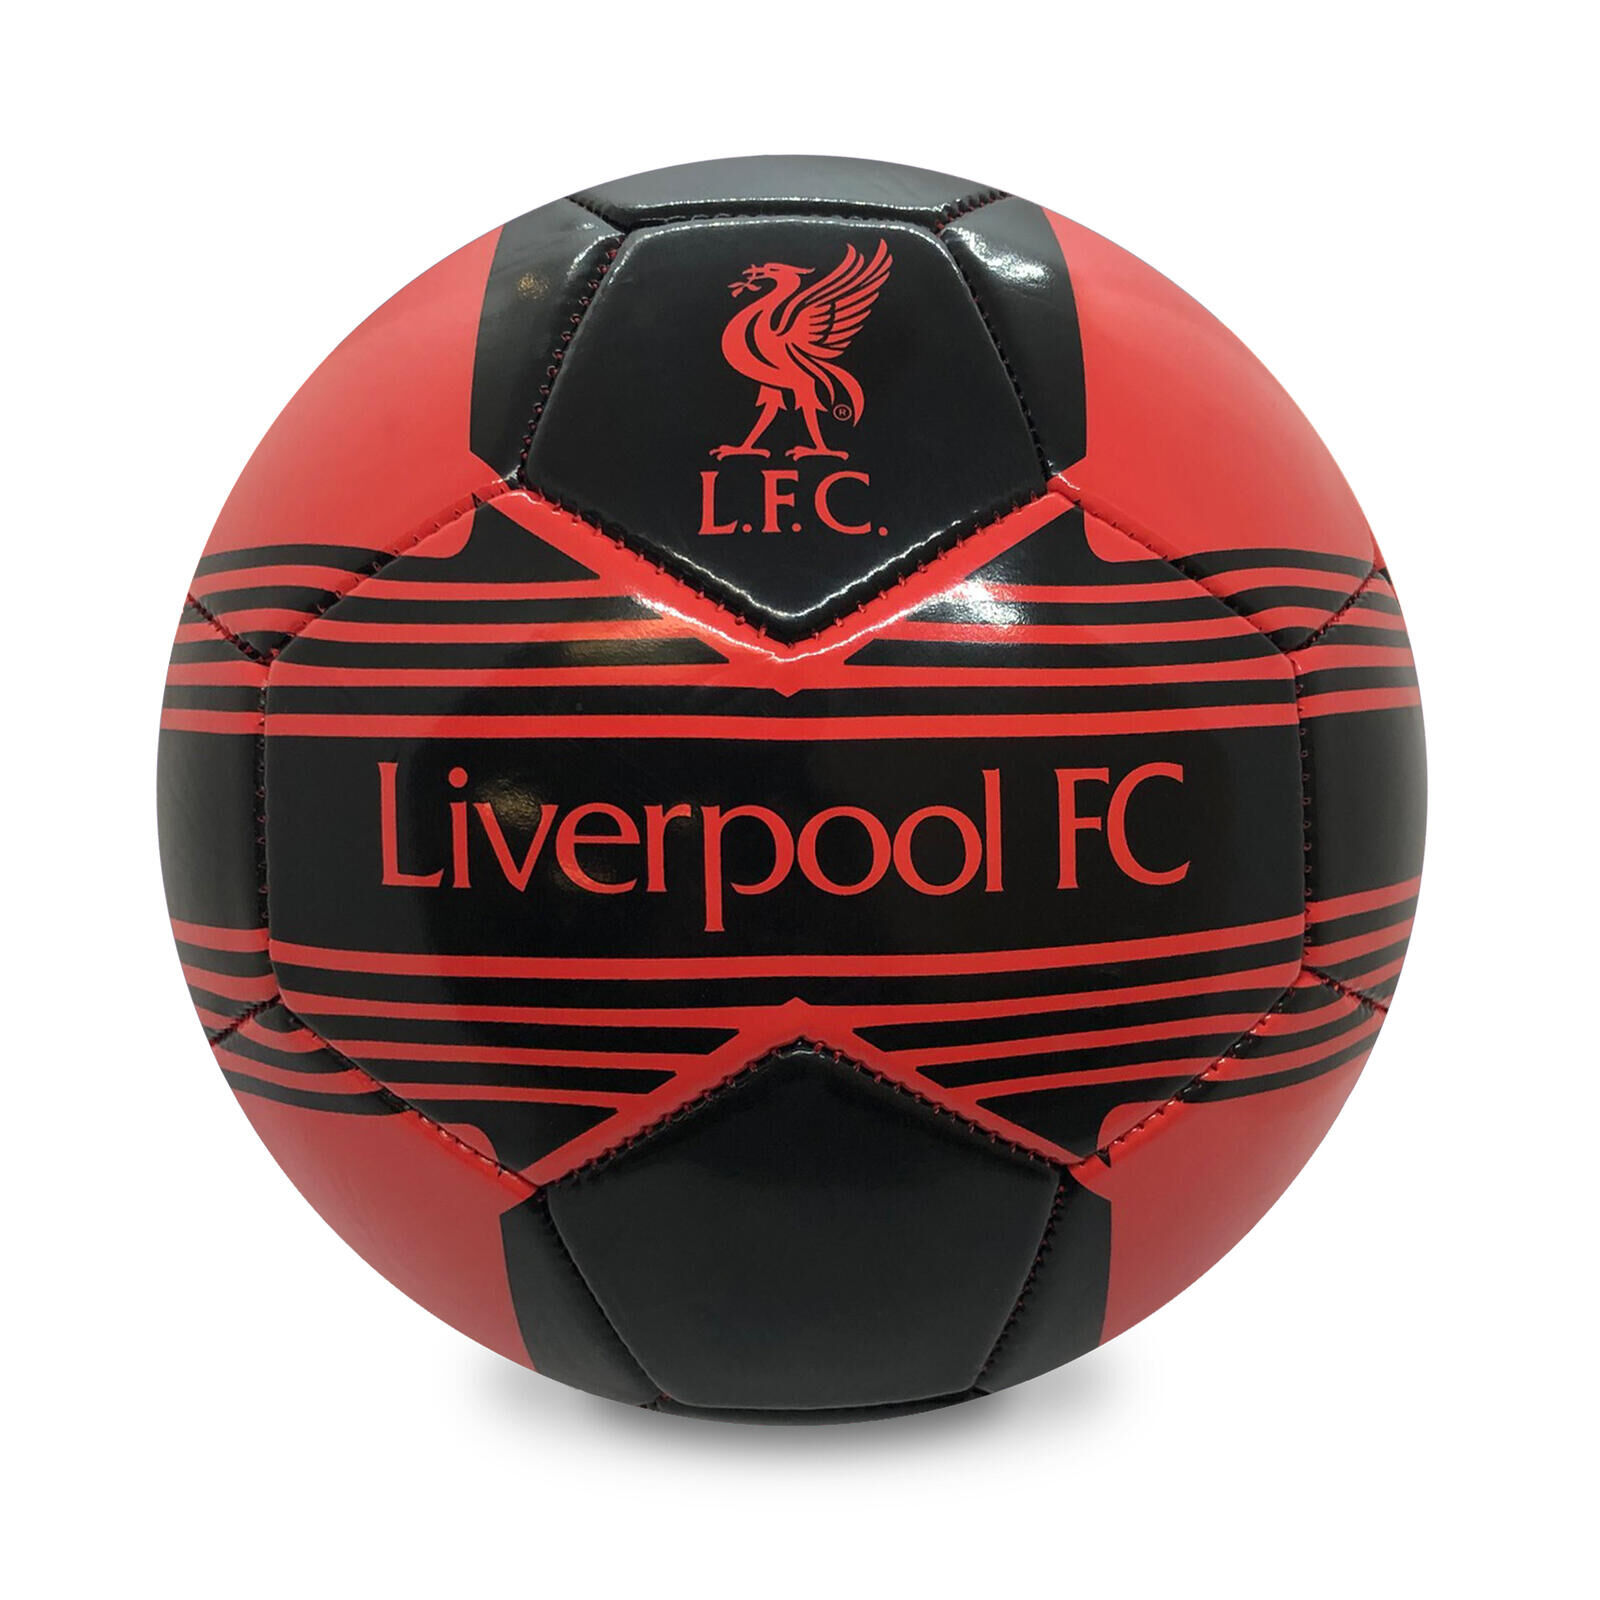 LIVERPOOL FC Liverpool FC Football Size 4 Crest Red OFFICIAL Gift